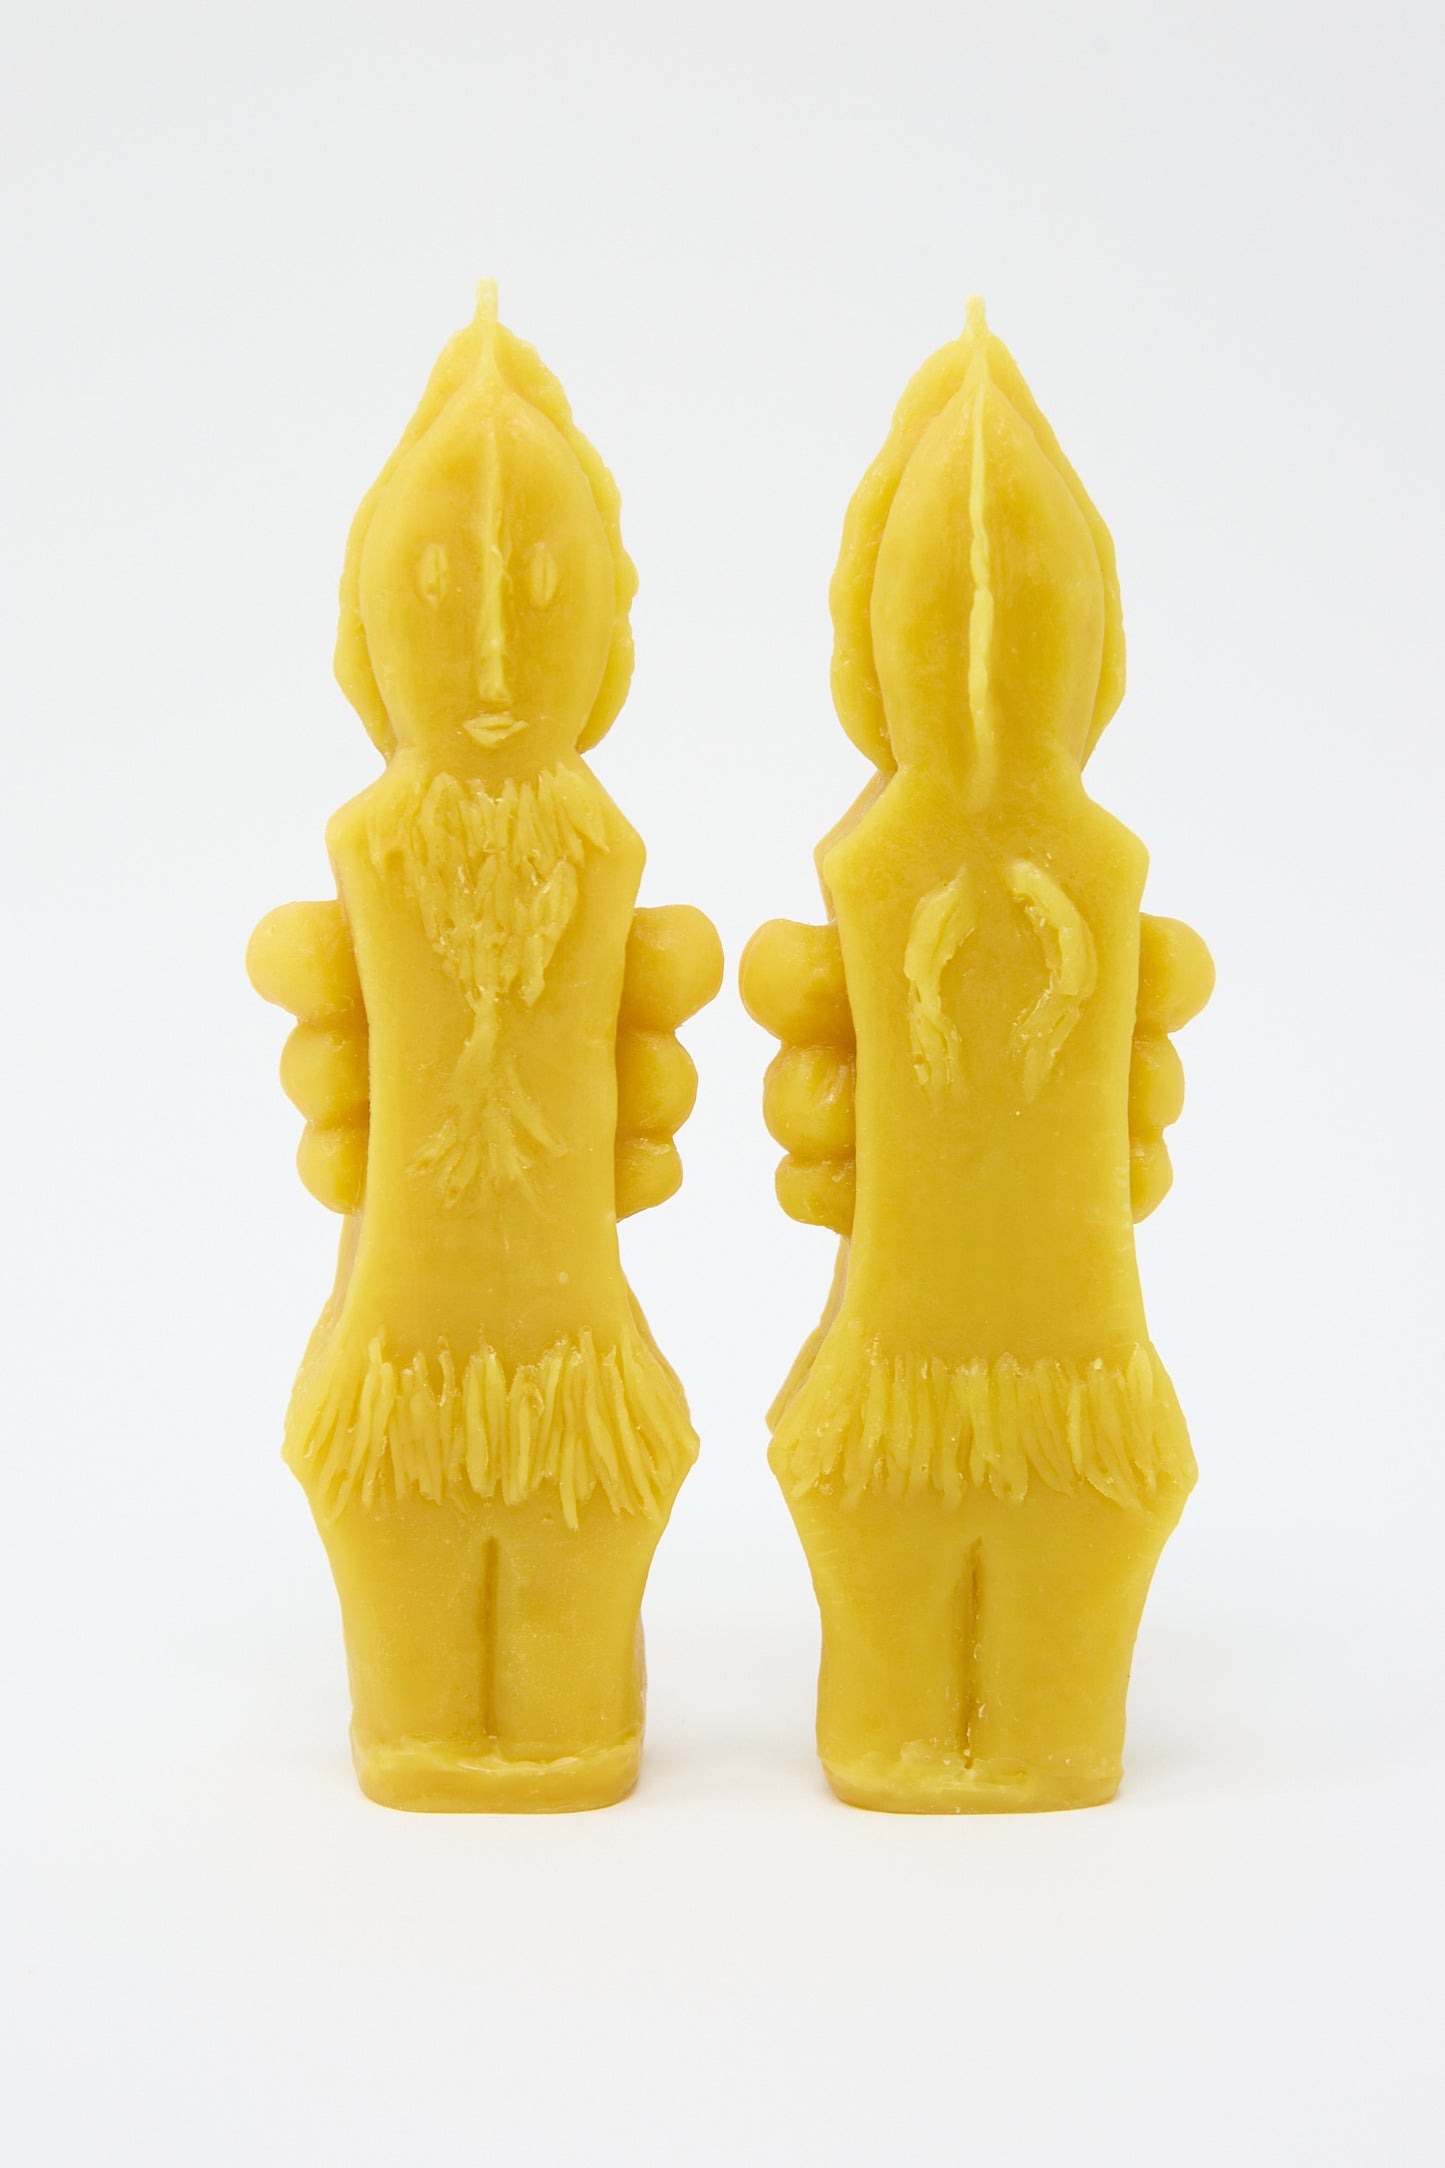 Two Plant Goddess Candles shaped like human figures, standing upright on a white background, made by hand in Kyoto by Rinn to Hitsuji.